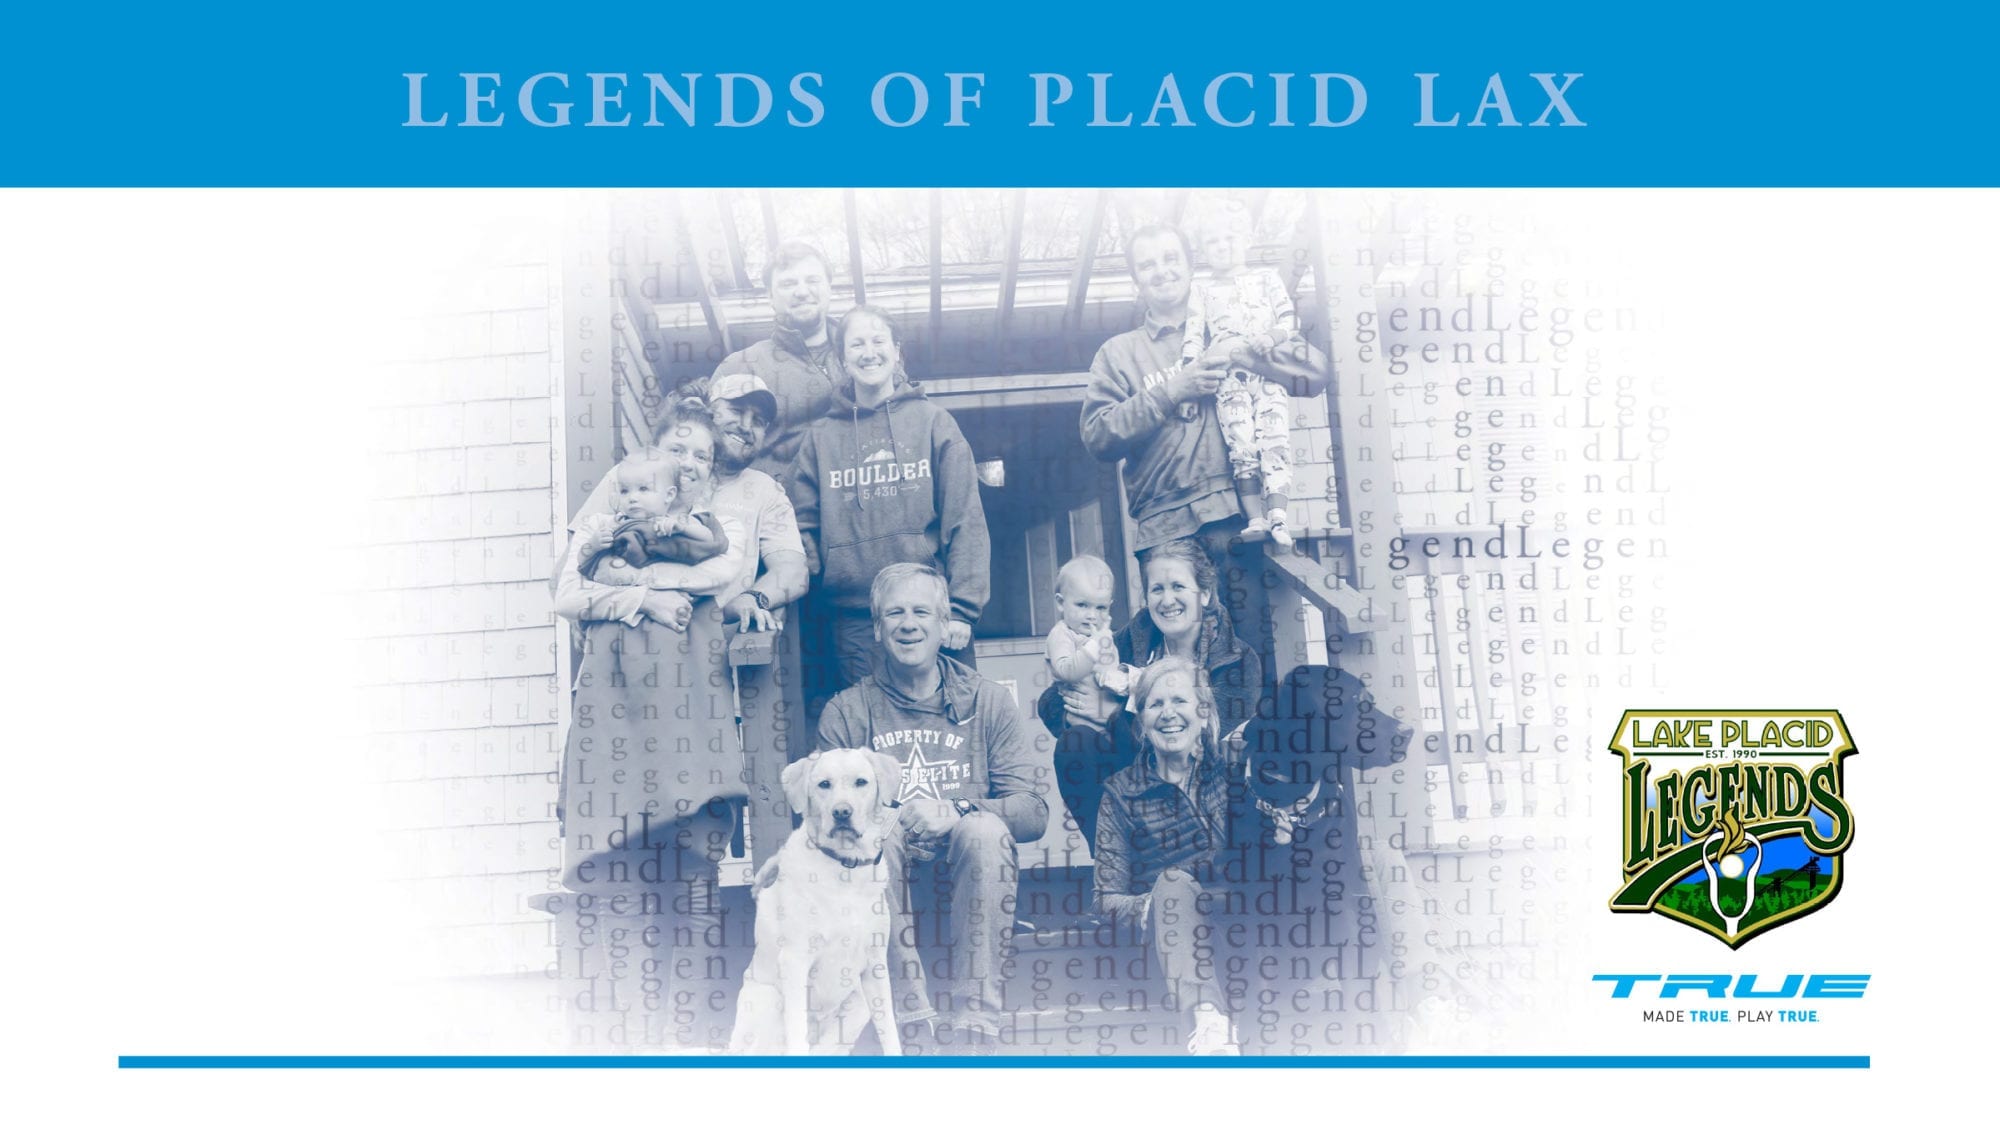 placid legends frank family summit lax ventures lax all stars grow the game